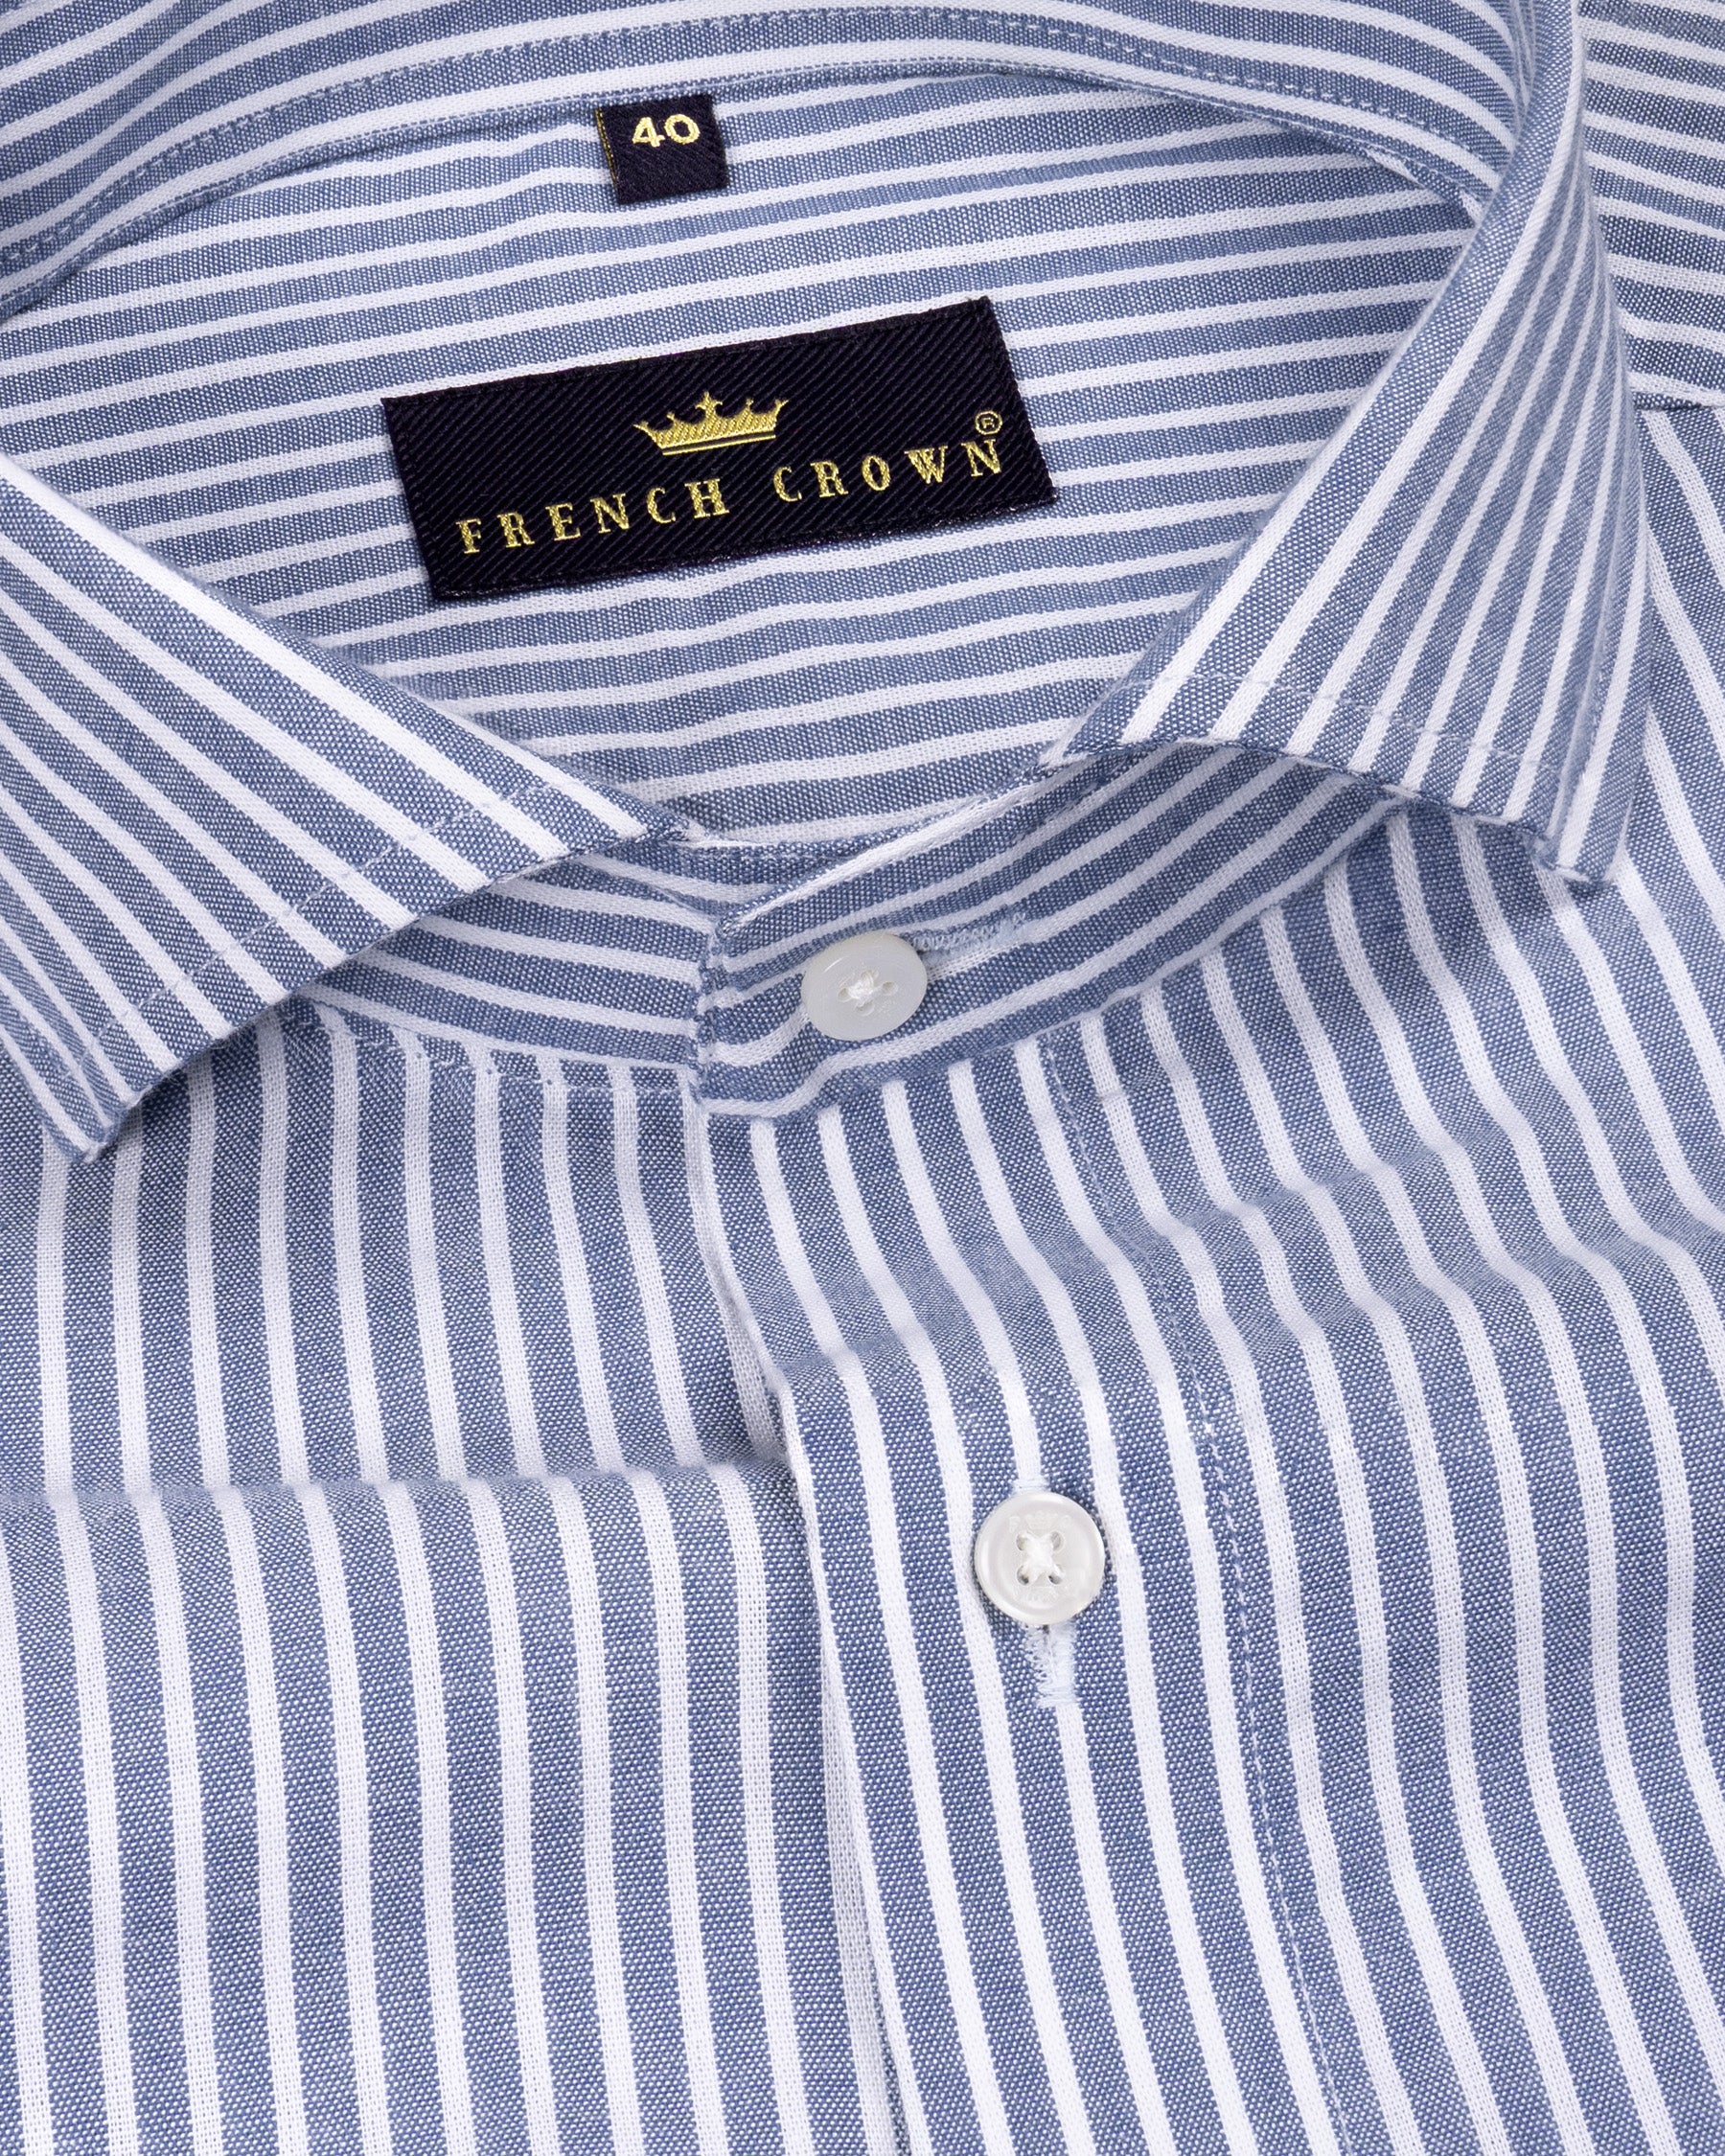 Wild Blue Yonder with White Striped Royal Oxford Shirt 5359-CA-38, 5359-CA-H-38, 5359-CA-39, 5359-CA-H-39, 5359-CA-40, 5359-CA-H-40, 5359-CA-42, 5359-CA-H-42, 5359-CA-44, 5359-CA-H-44, 5359-CA-46, 5359-CA-H-46, 5359-CA-48, 5359-CA-H-48, 5359-CA-50, 5359-CA-H-50, 5359-CA-52, 5359-CA-H-52